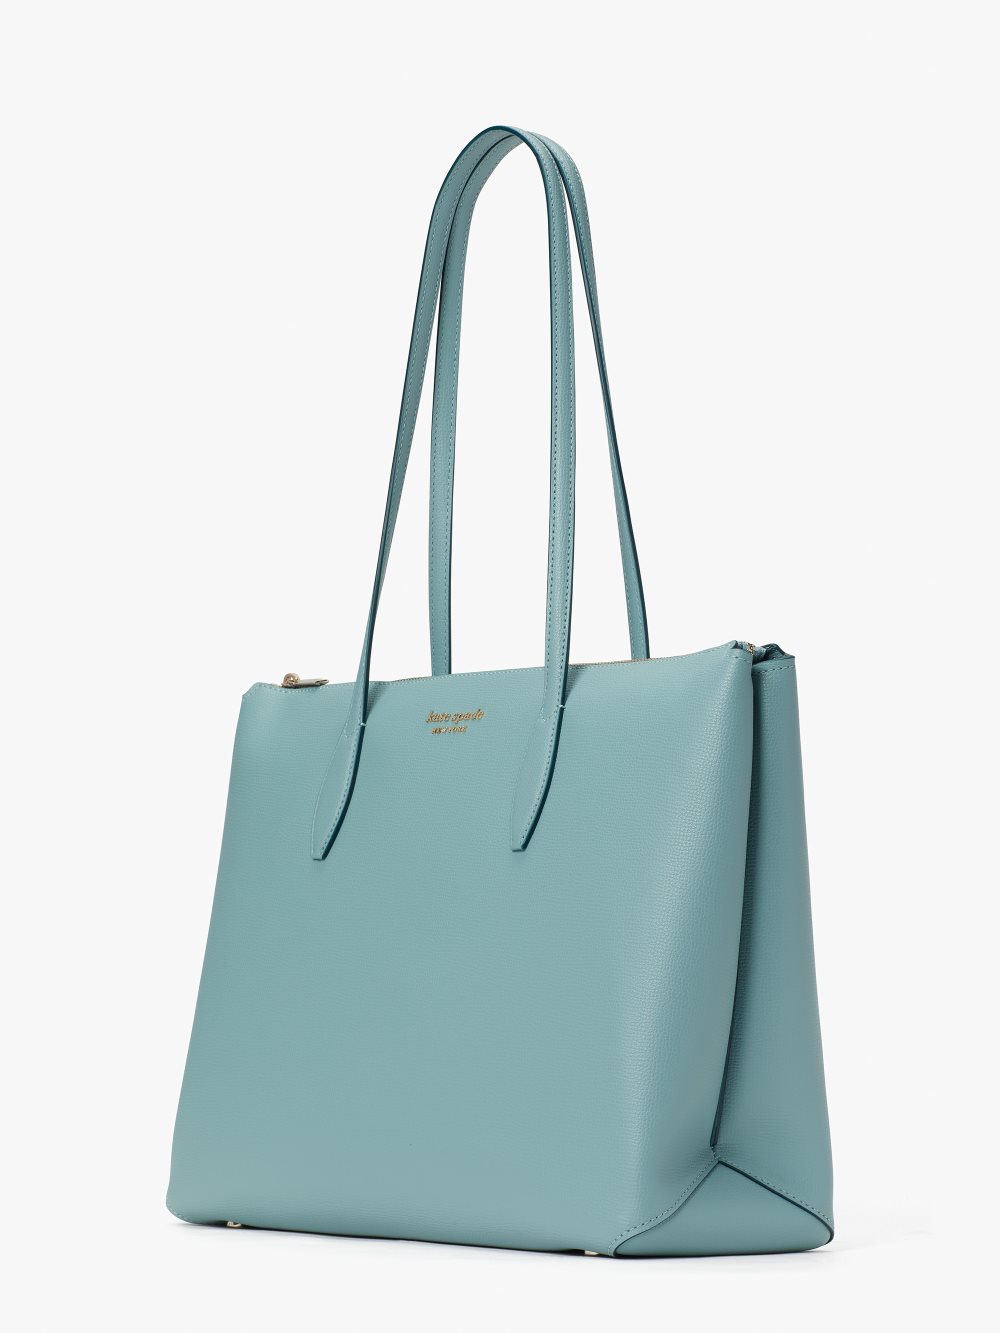 Women's agean teal all day large zip-top tote | Kate Spade